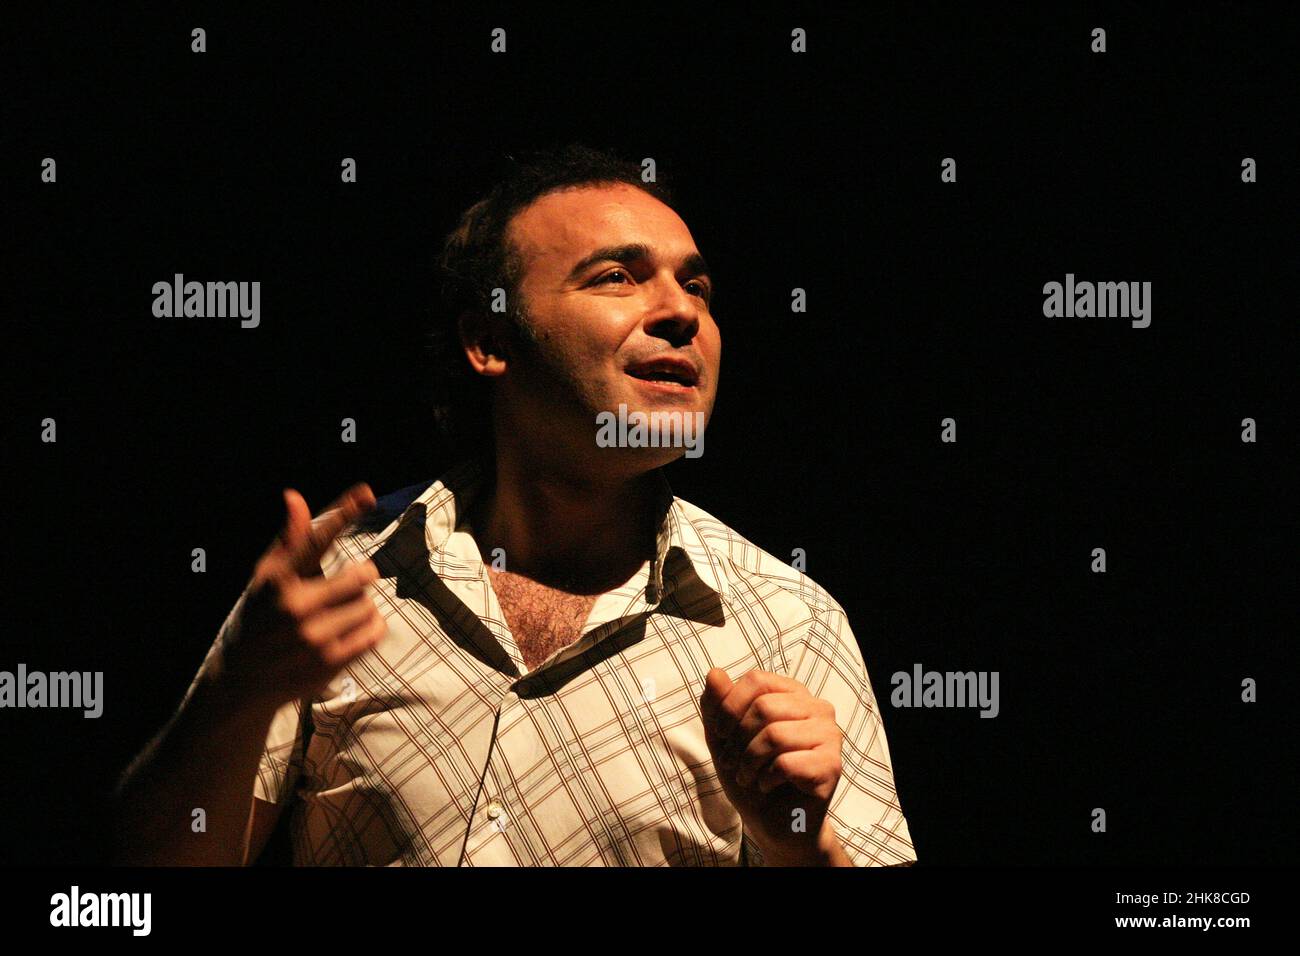 ISTANBUL, TURKEY - MARCH 28: Turkish actor, comedian and thespian Engin Gunaydin portrait on March 28, 2008 in Istanbul, Turkey. Stock Photo